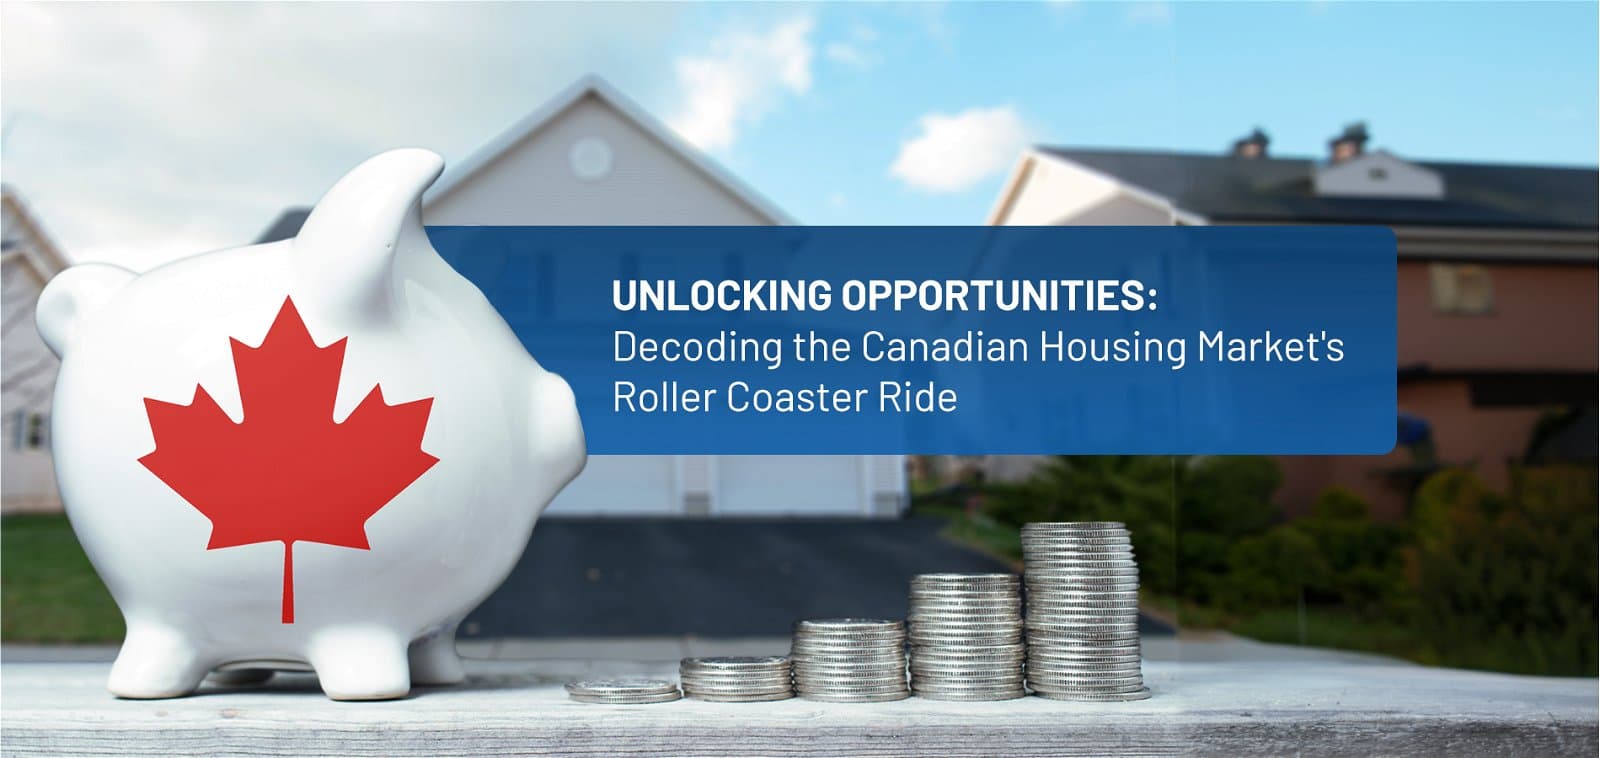 Unlocking Opportunities: Decoding the Canadian Housing Market’s Roller Coaster Ride